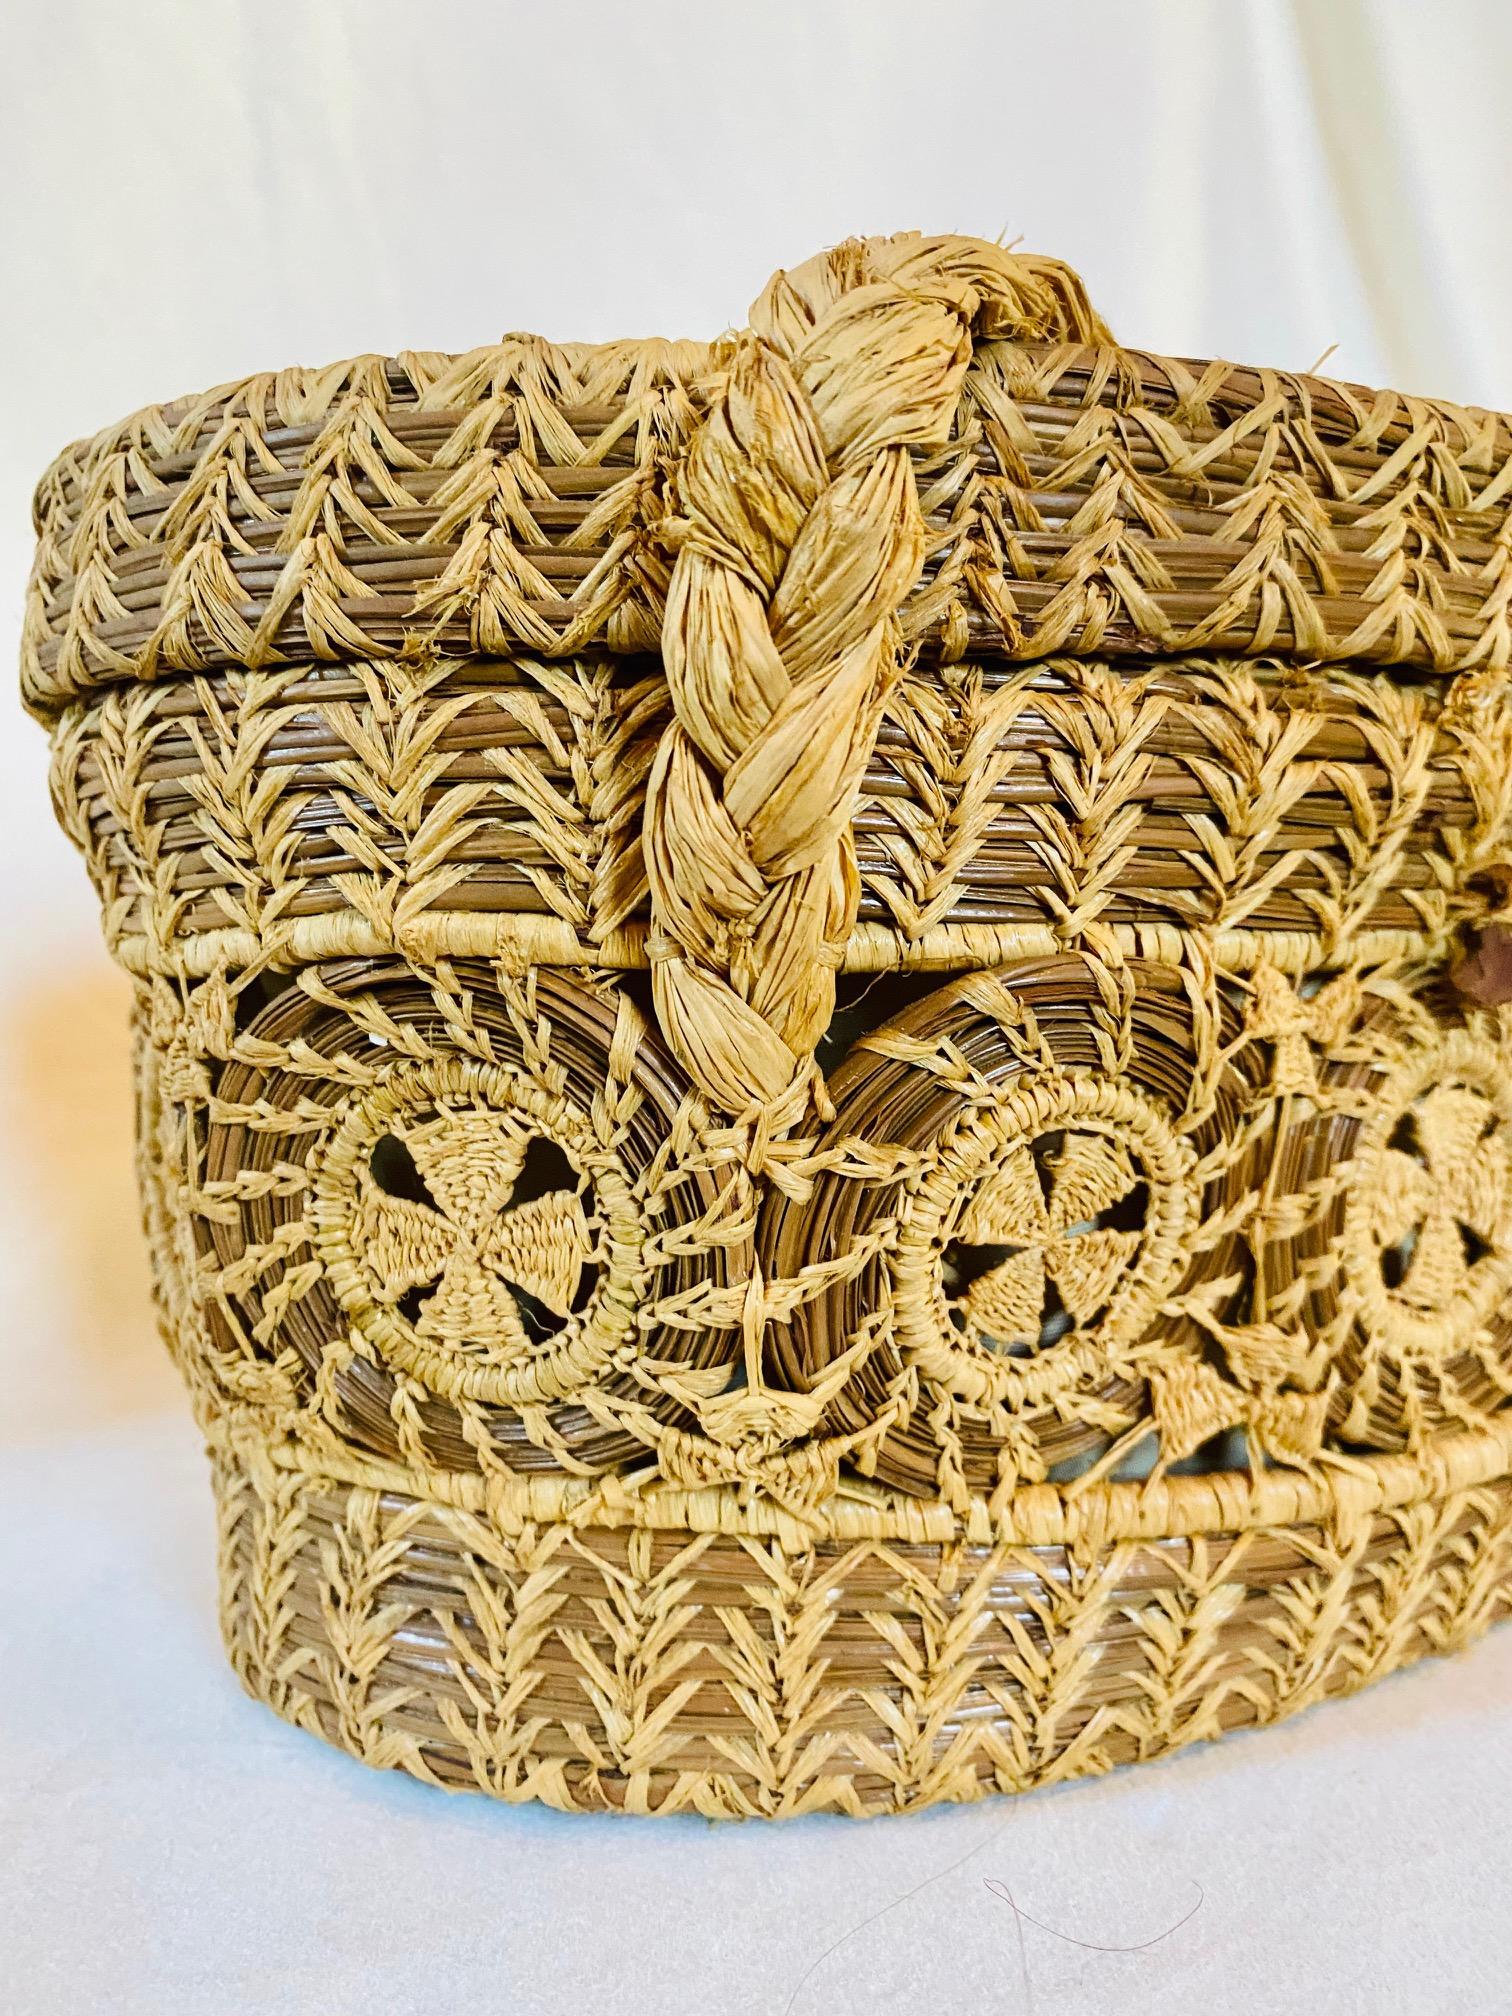 Early Vintage Mattapoisett Basket, likely by Gladys Ellis, Mid 20th Century, a hand-crafted basket modeled after a Nantucket purse, having a flat oval 